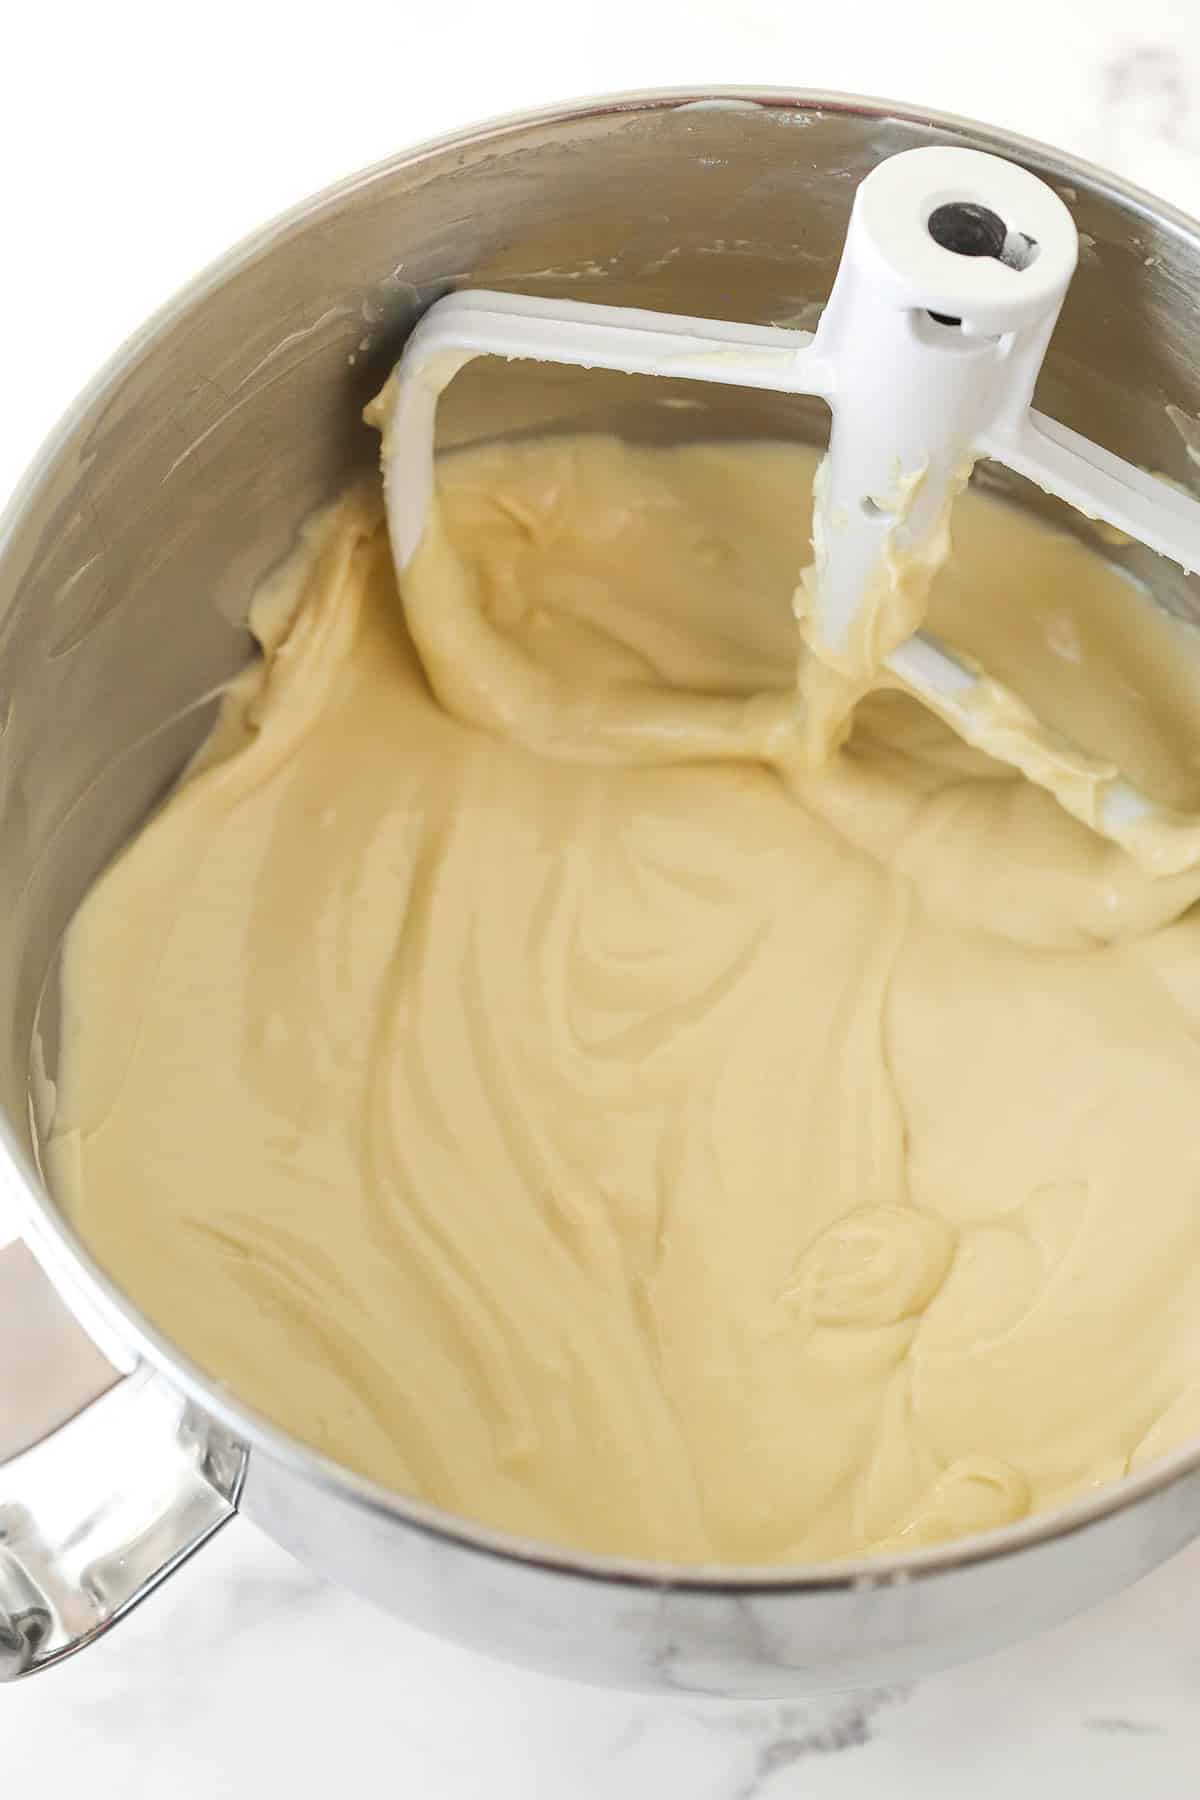 Mixing Baileys and vanilla extract into cream cheese filling.